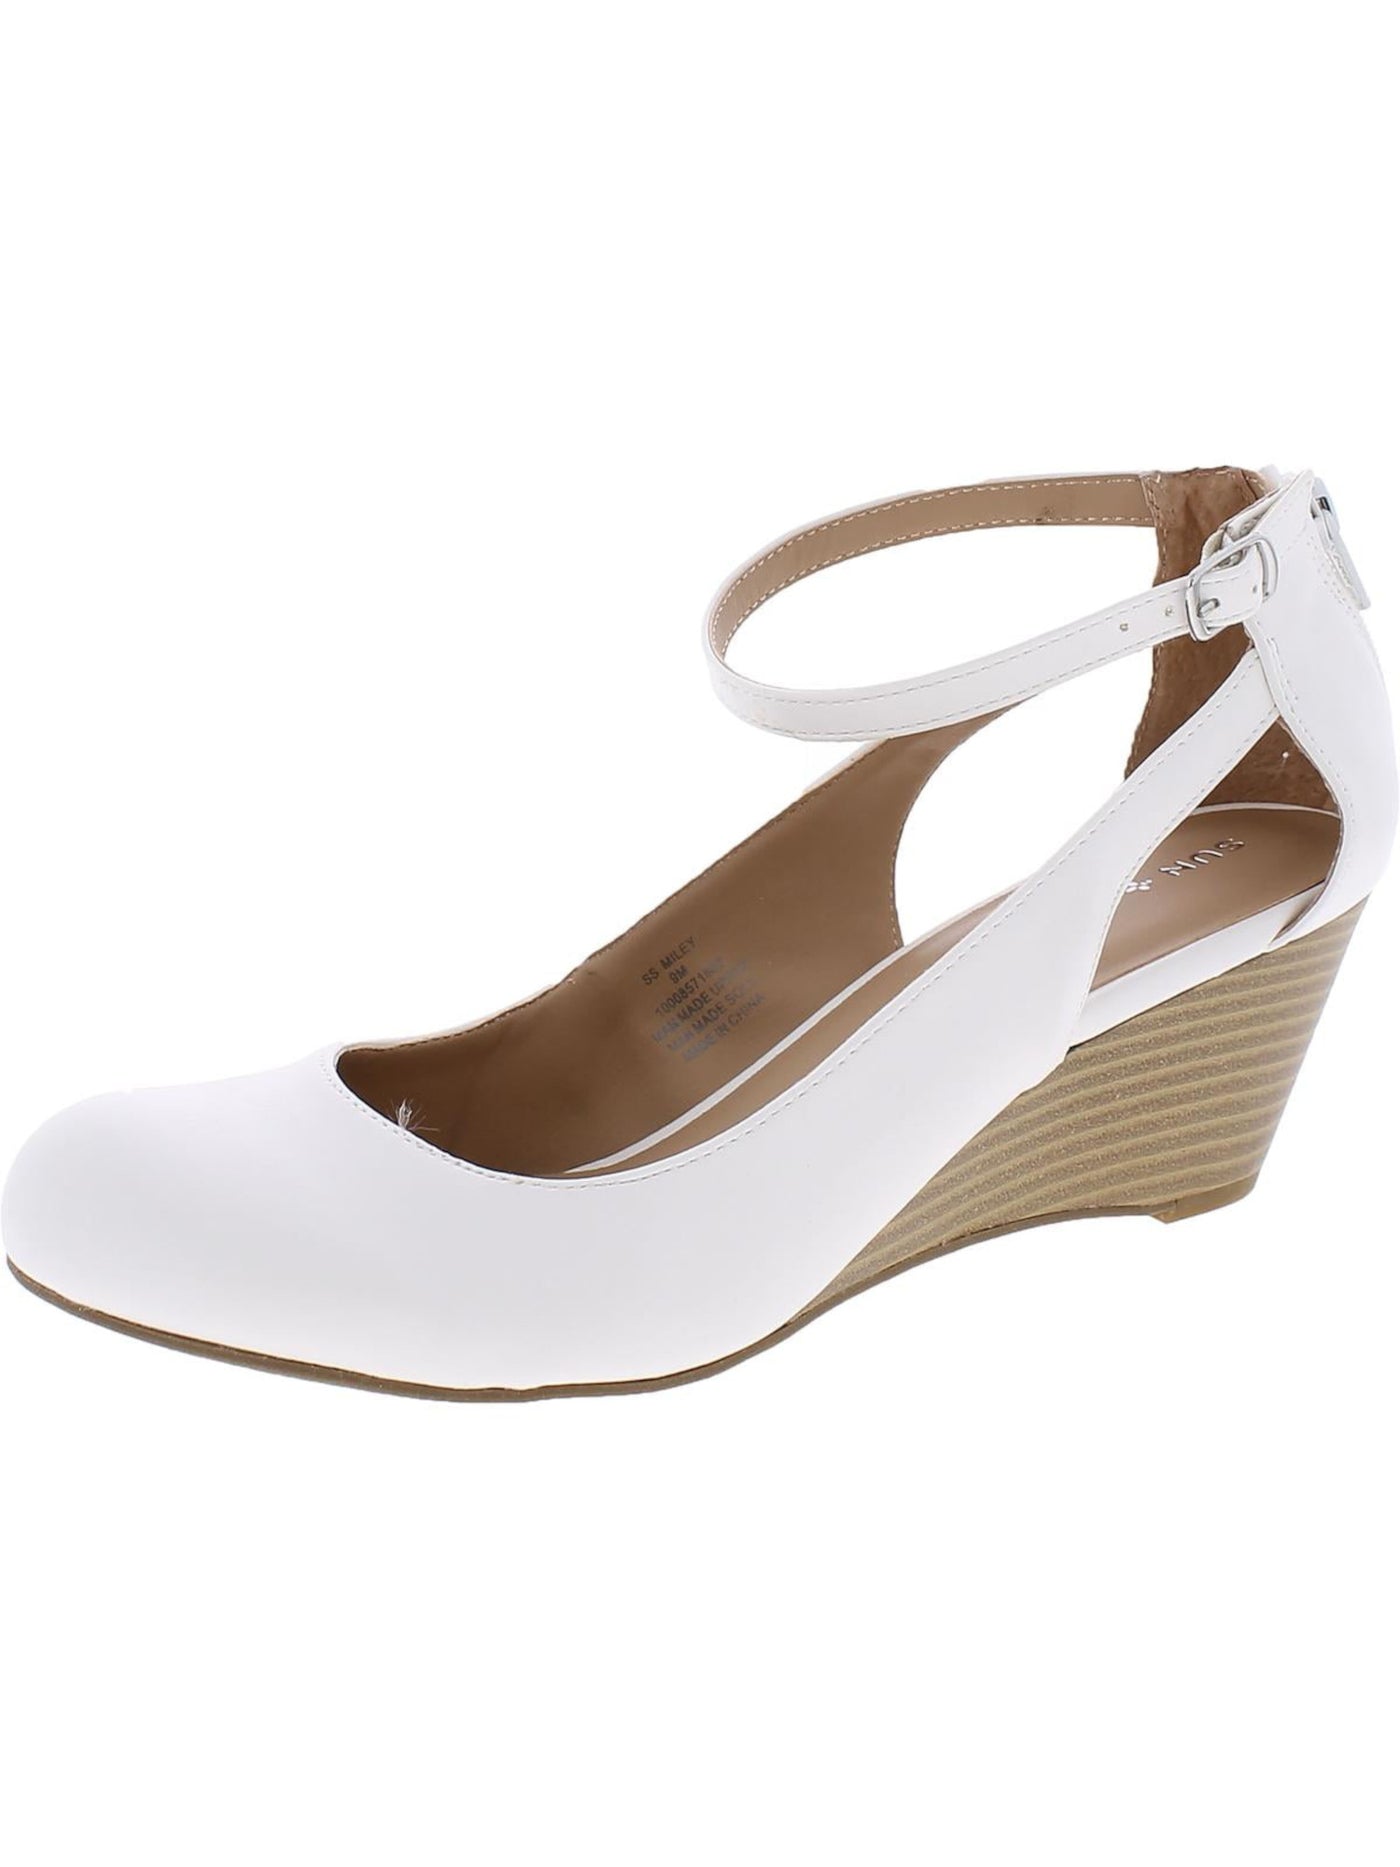 SUN STONE Womens White Heel Cutouts Ankle Strap Comfort Buckle Accent Miley Round Toe Wedge Zip-Up Dress Heels Shoes 5 M